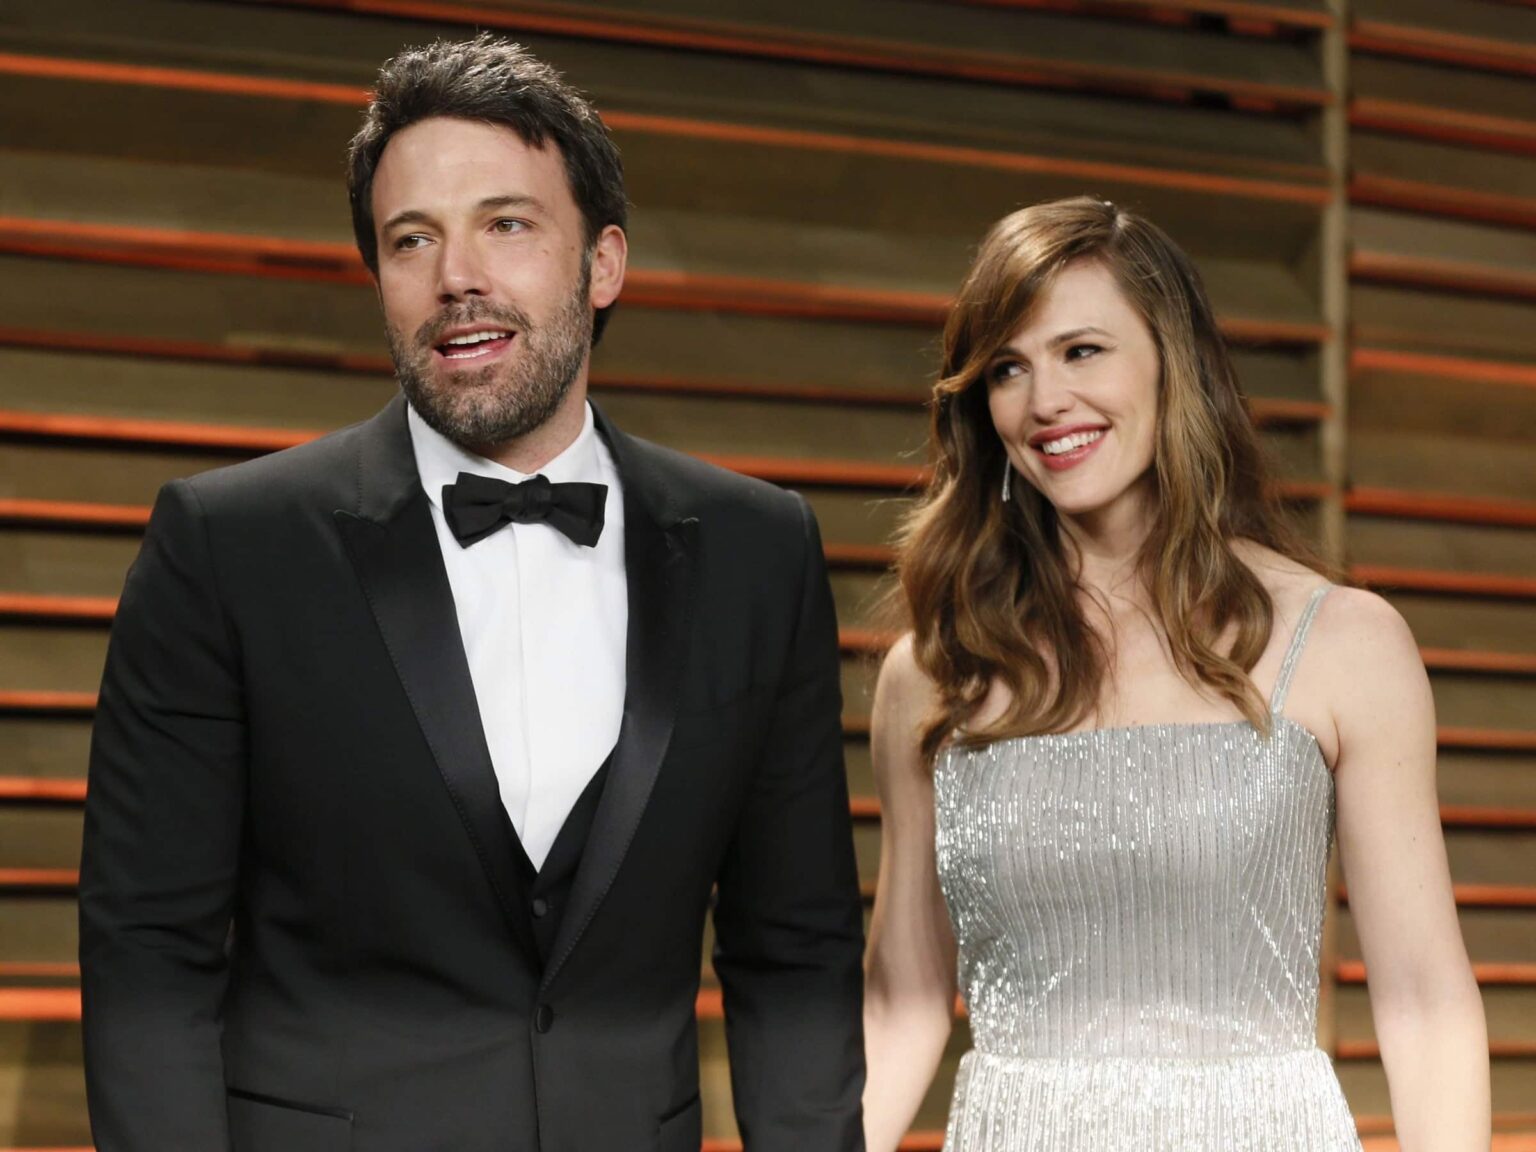 Anaffleck is no more. Does that mean the road is clear for a Ben Affleck & Jennifer Garner reunion? Take a walk down Bennifer 2.0's history lane!